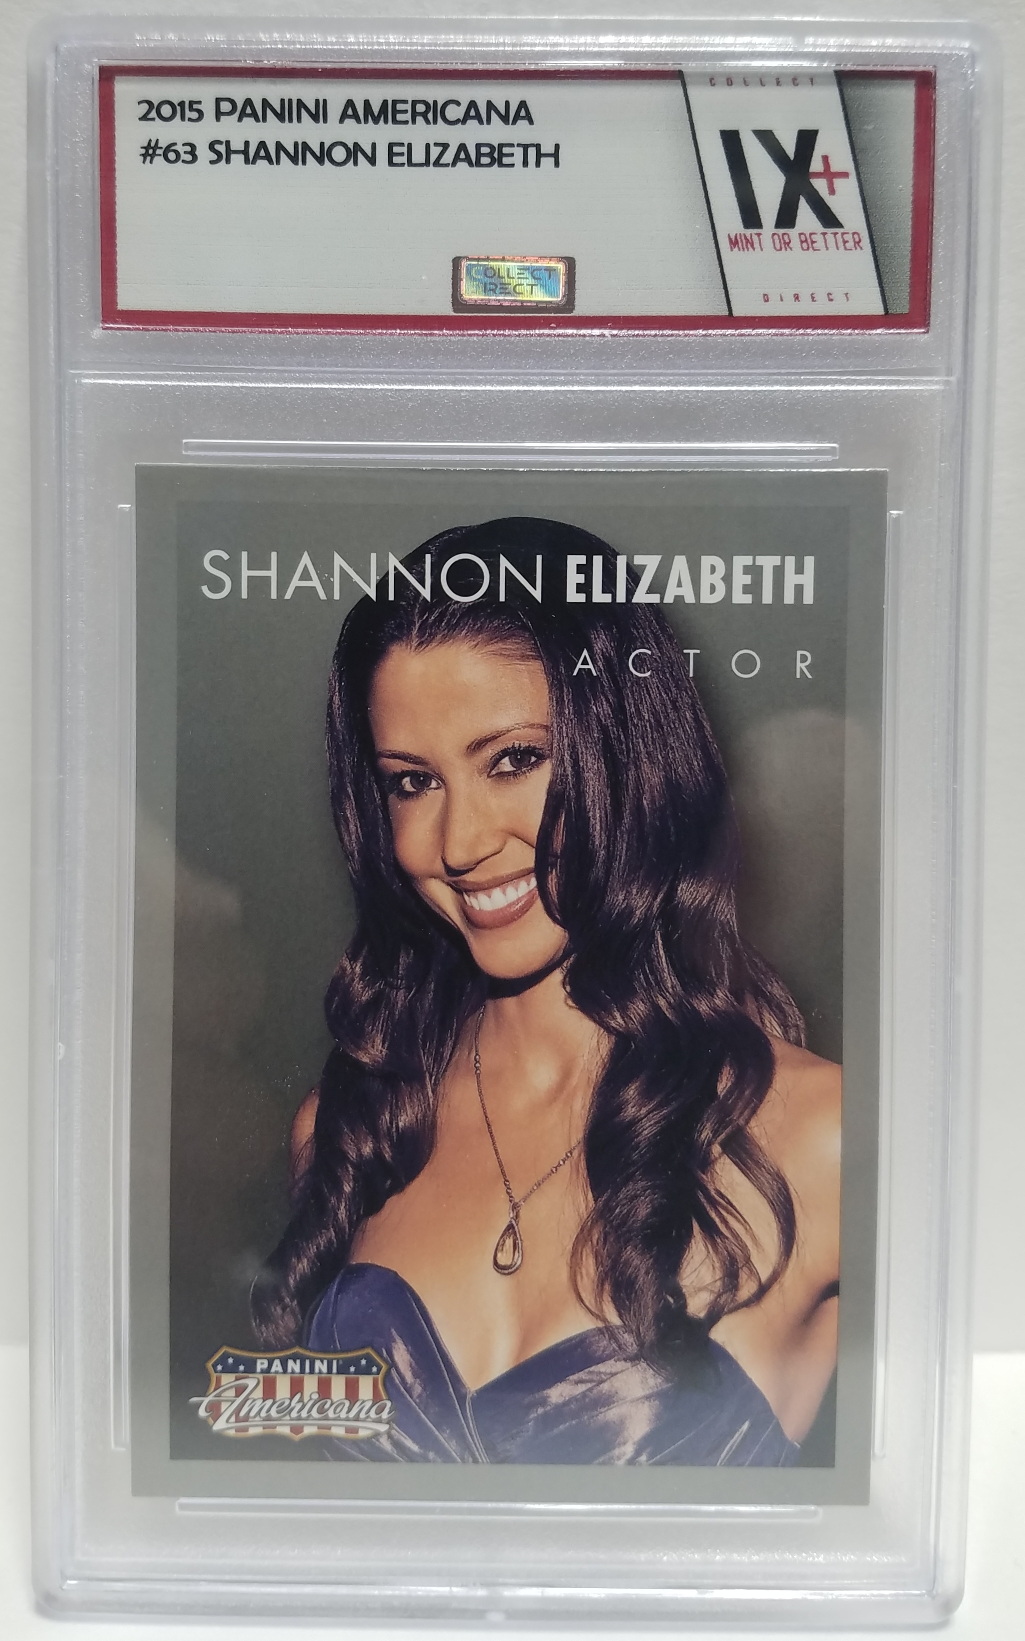 SHANNON ELIZABETH 2015 Panini Americana #63 Collect Direct Graded Mint or Better Actor AMERICAN PIE